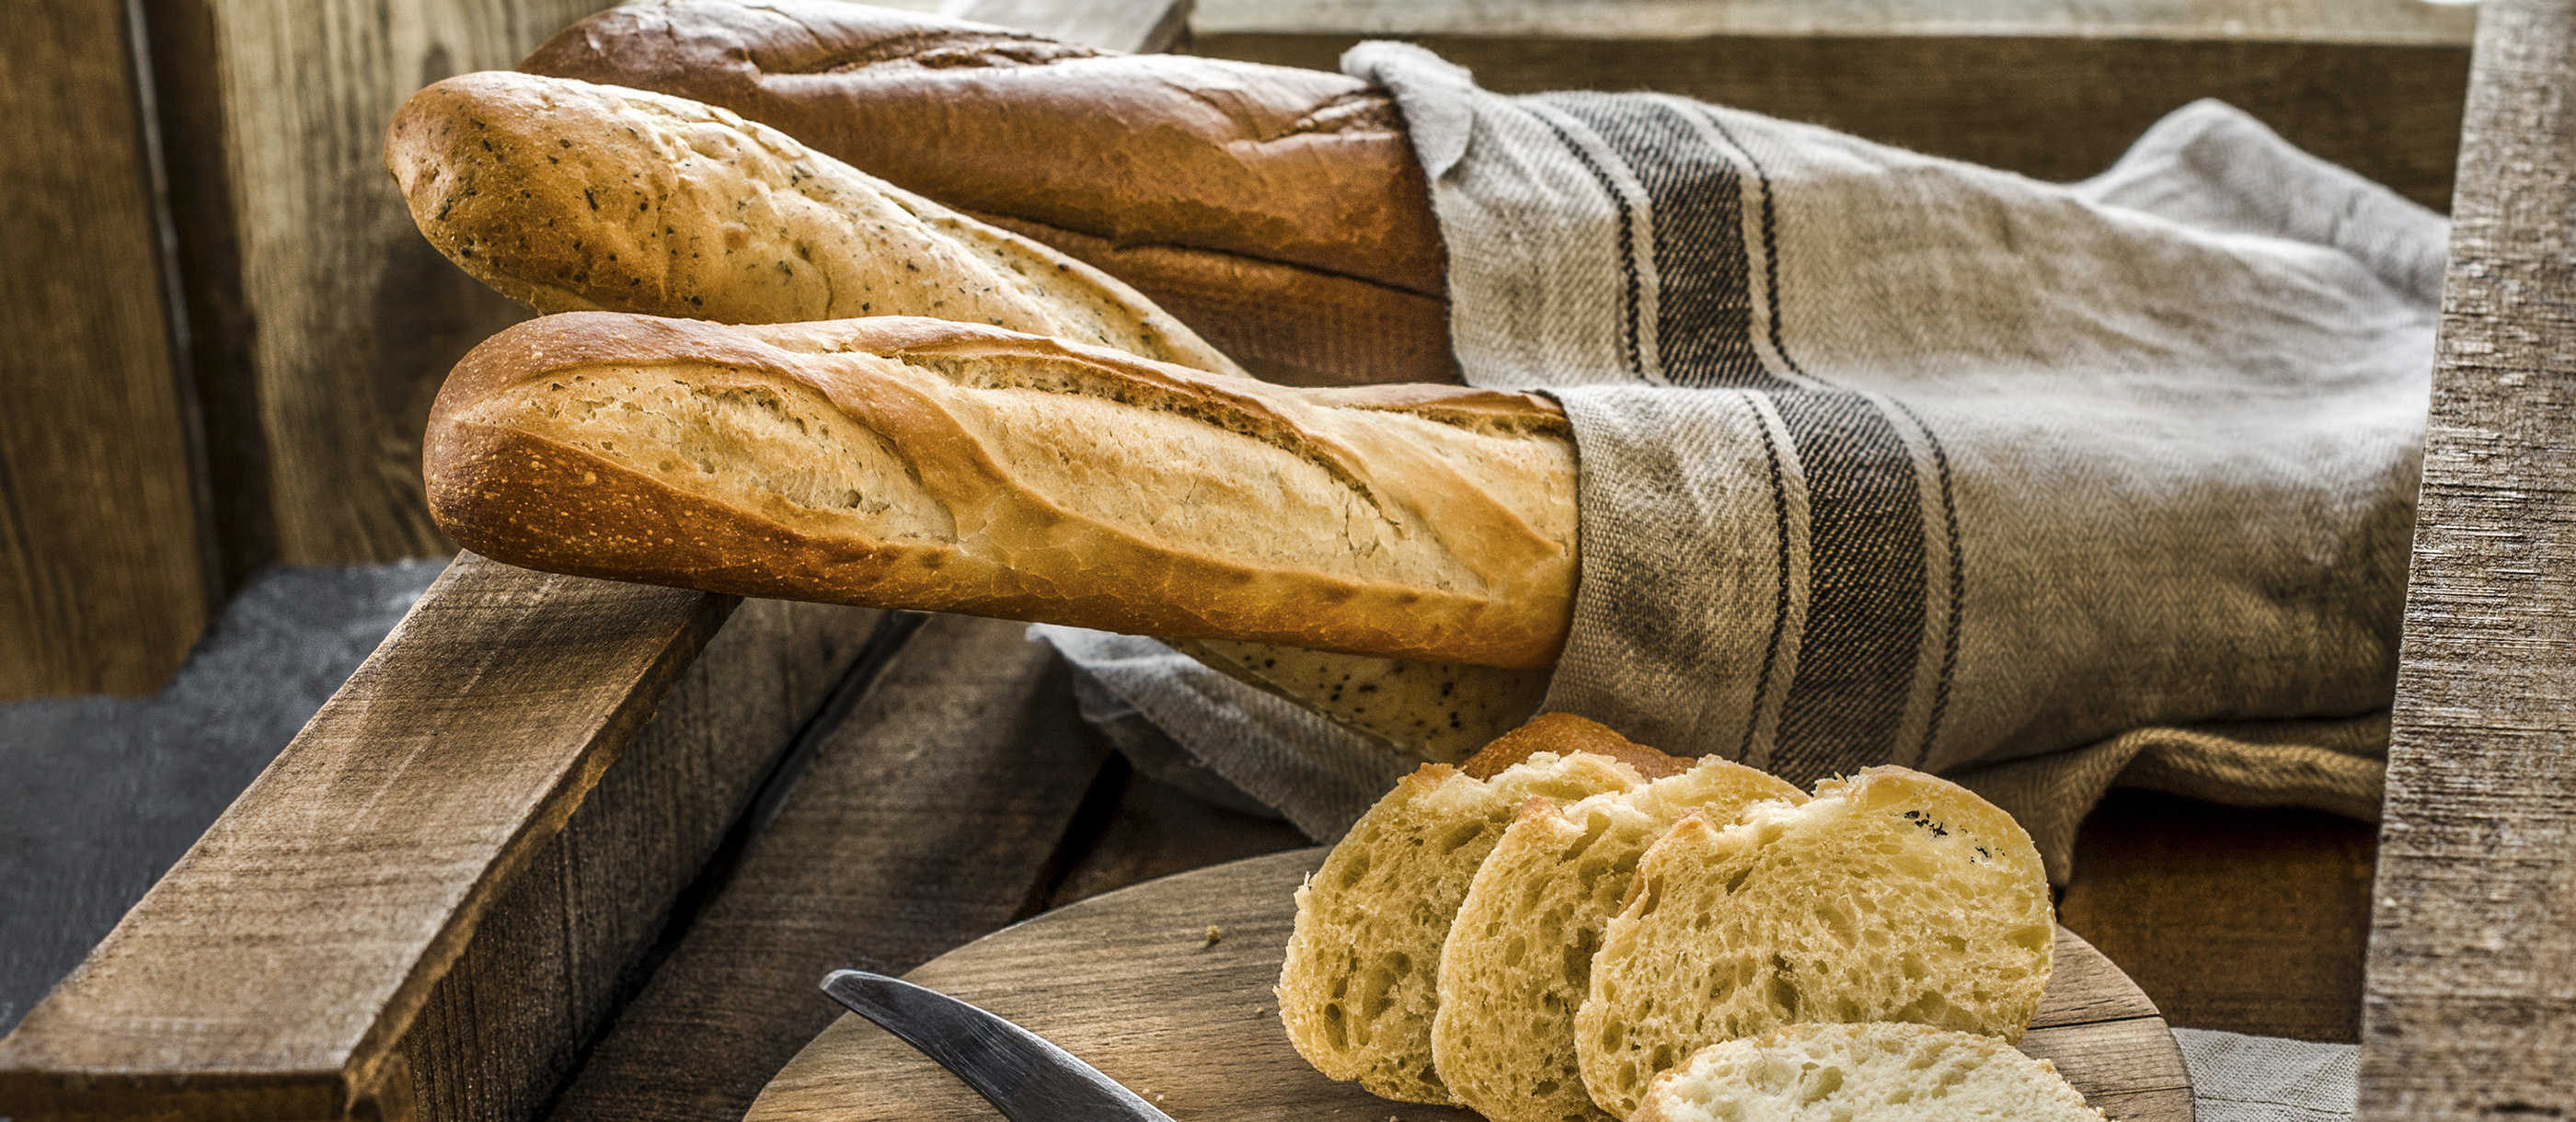 Baguette: A long, thin loaf of bread with a crisp crust and soft interior. 2800x1220 Dual Screen Background.